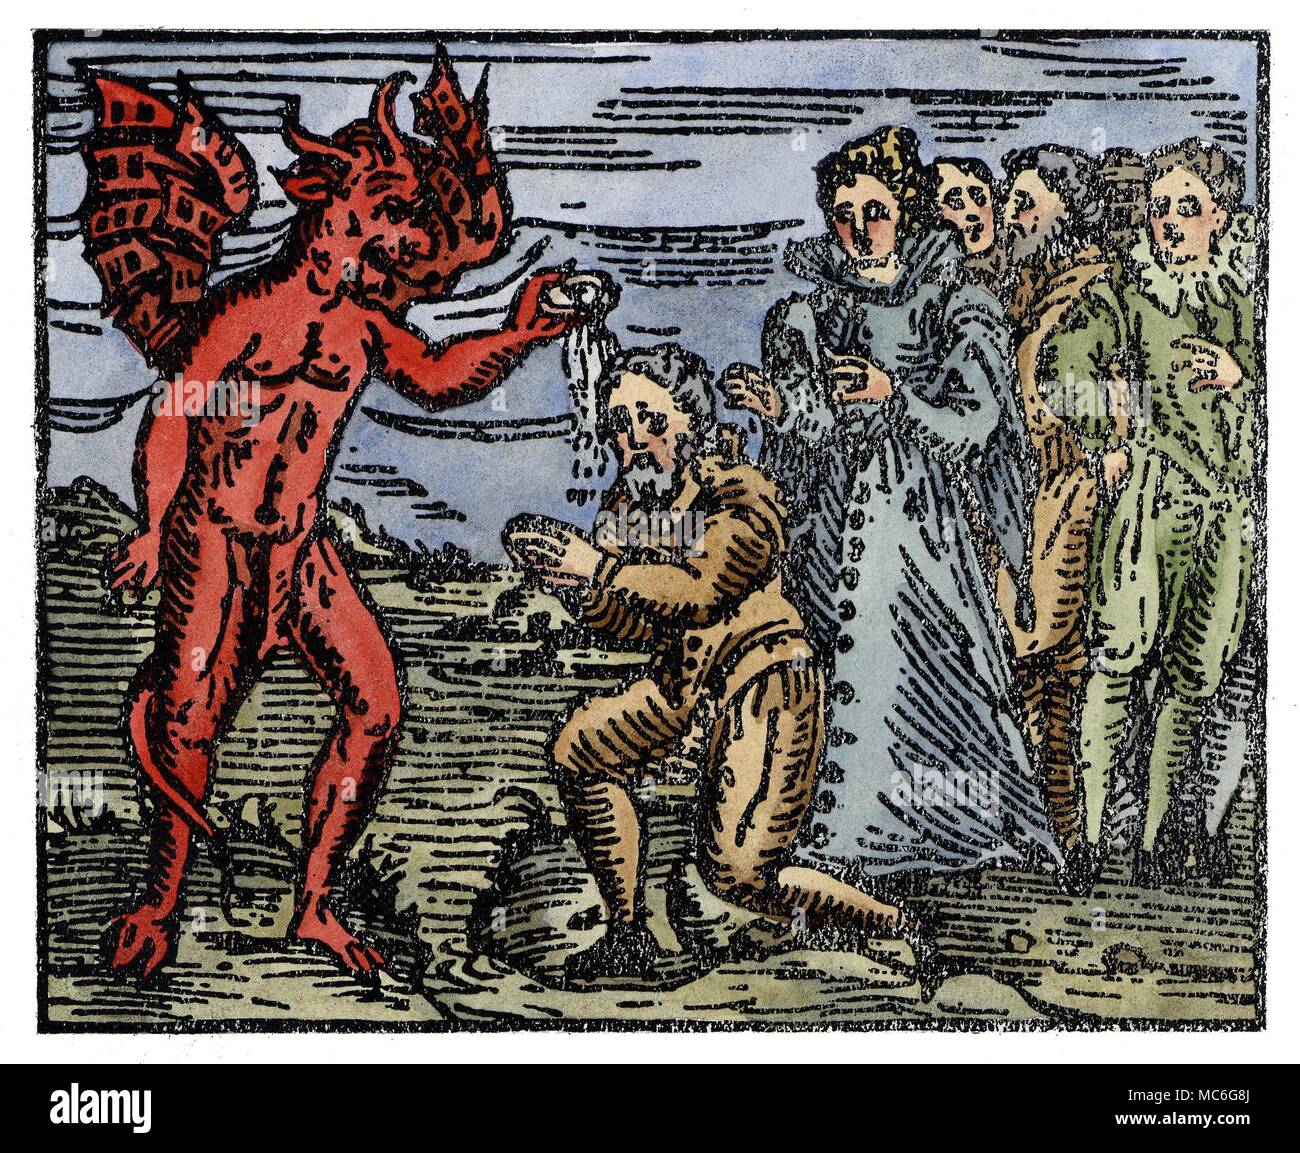 WITCHCRAFT - DEMONS The witch is baptised by the Devil, and in the name of Hell. Since the witch has renounced his Christian name, he is given another by his new owner, the Devil. Hand-coloured print from Francesco Maria Guazzo, Compendium Maleficarum, 1608. This was the most learned and precise of mediaeval witchcraft manuals, and in some respects (because it paid homage to the superstitions of the worst kind) one of the most horrible. Stock Photo